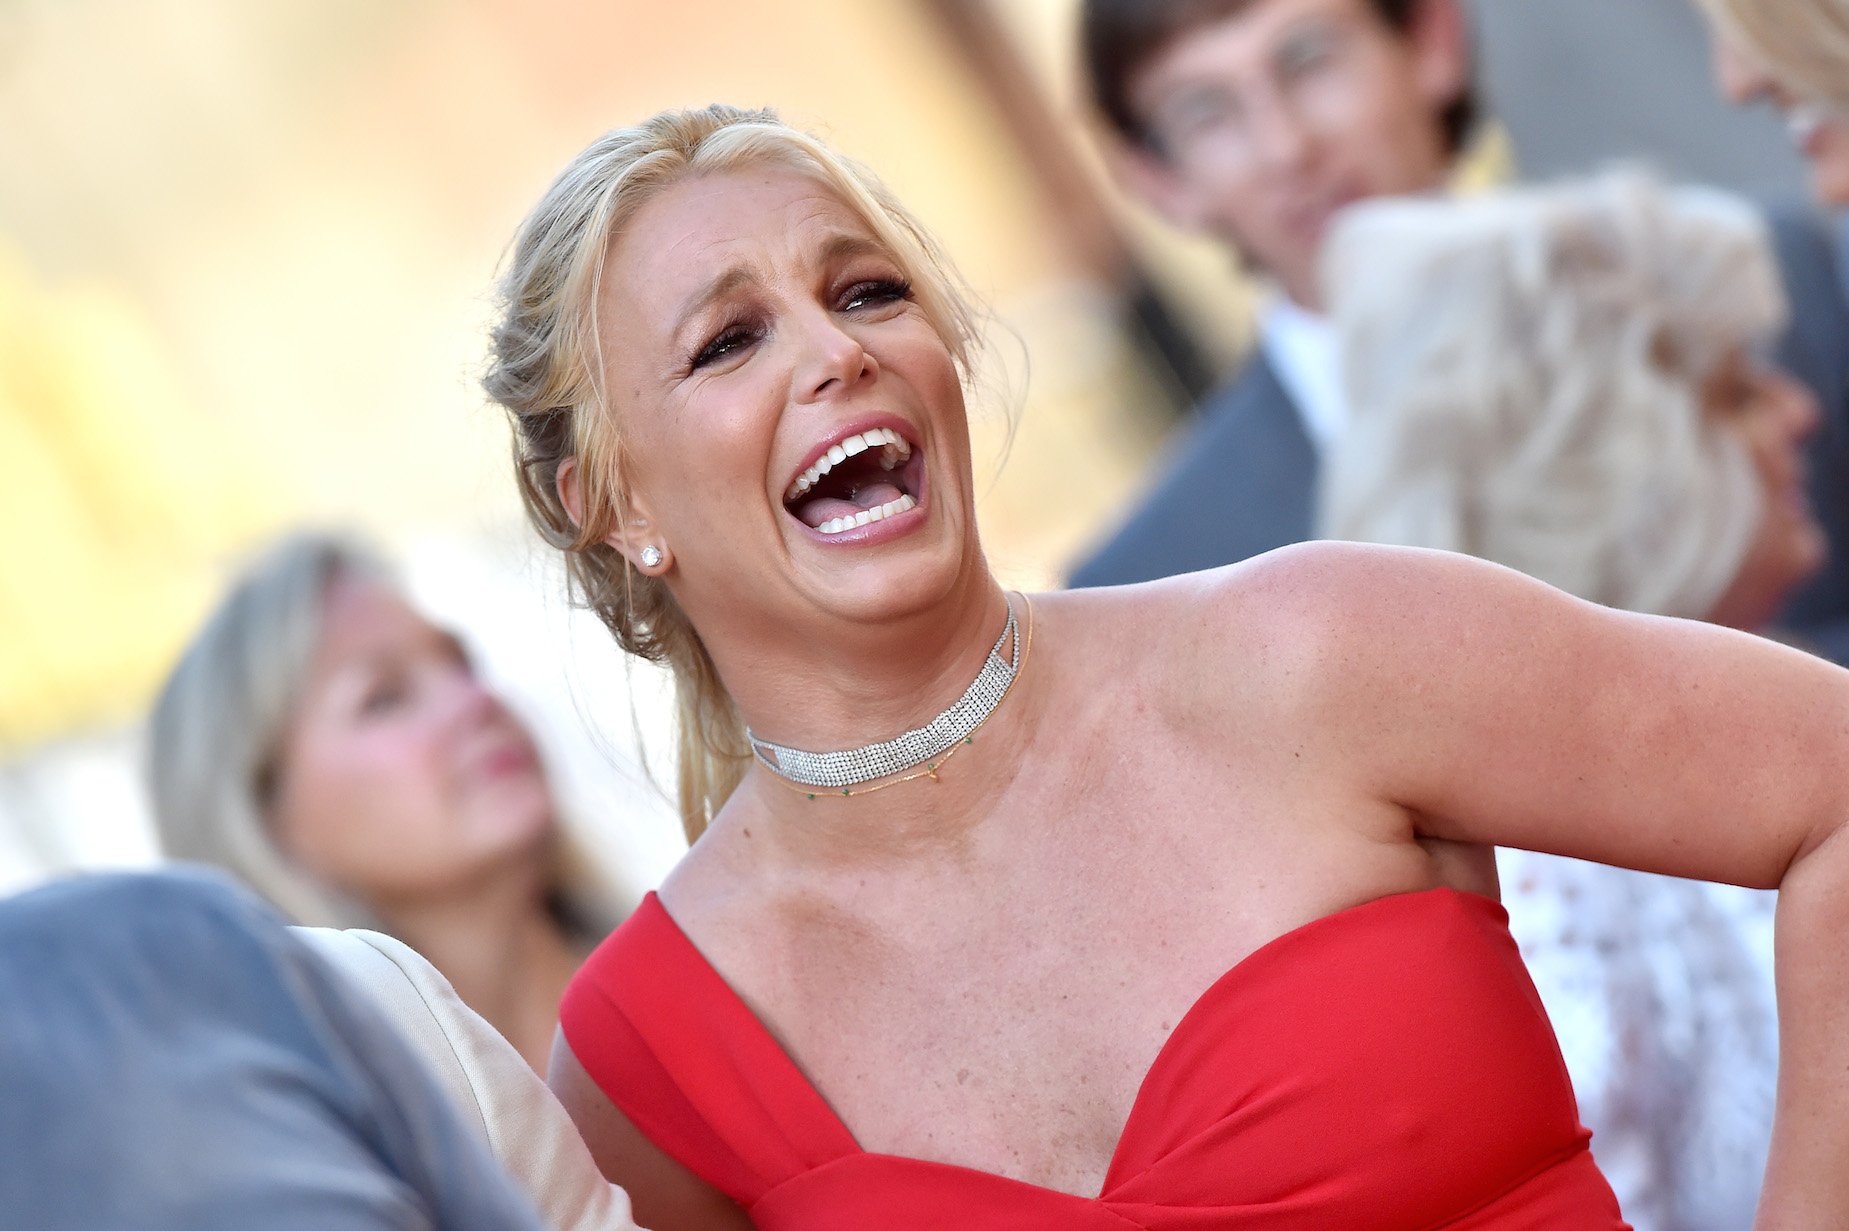 Britney Spears laughing while attending a movie premiere in 2019. Britney Spears' age is 37 in the photo.